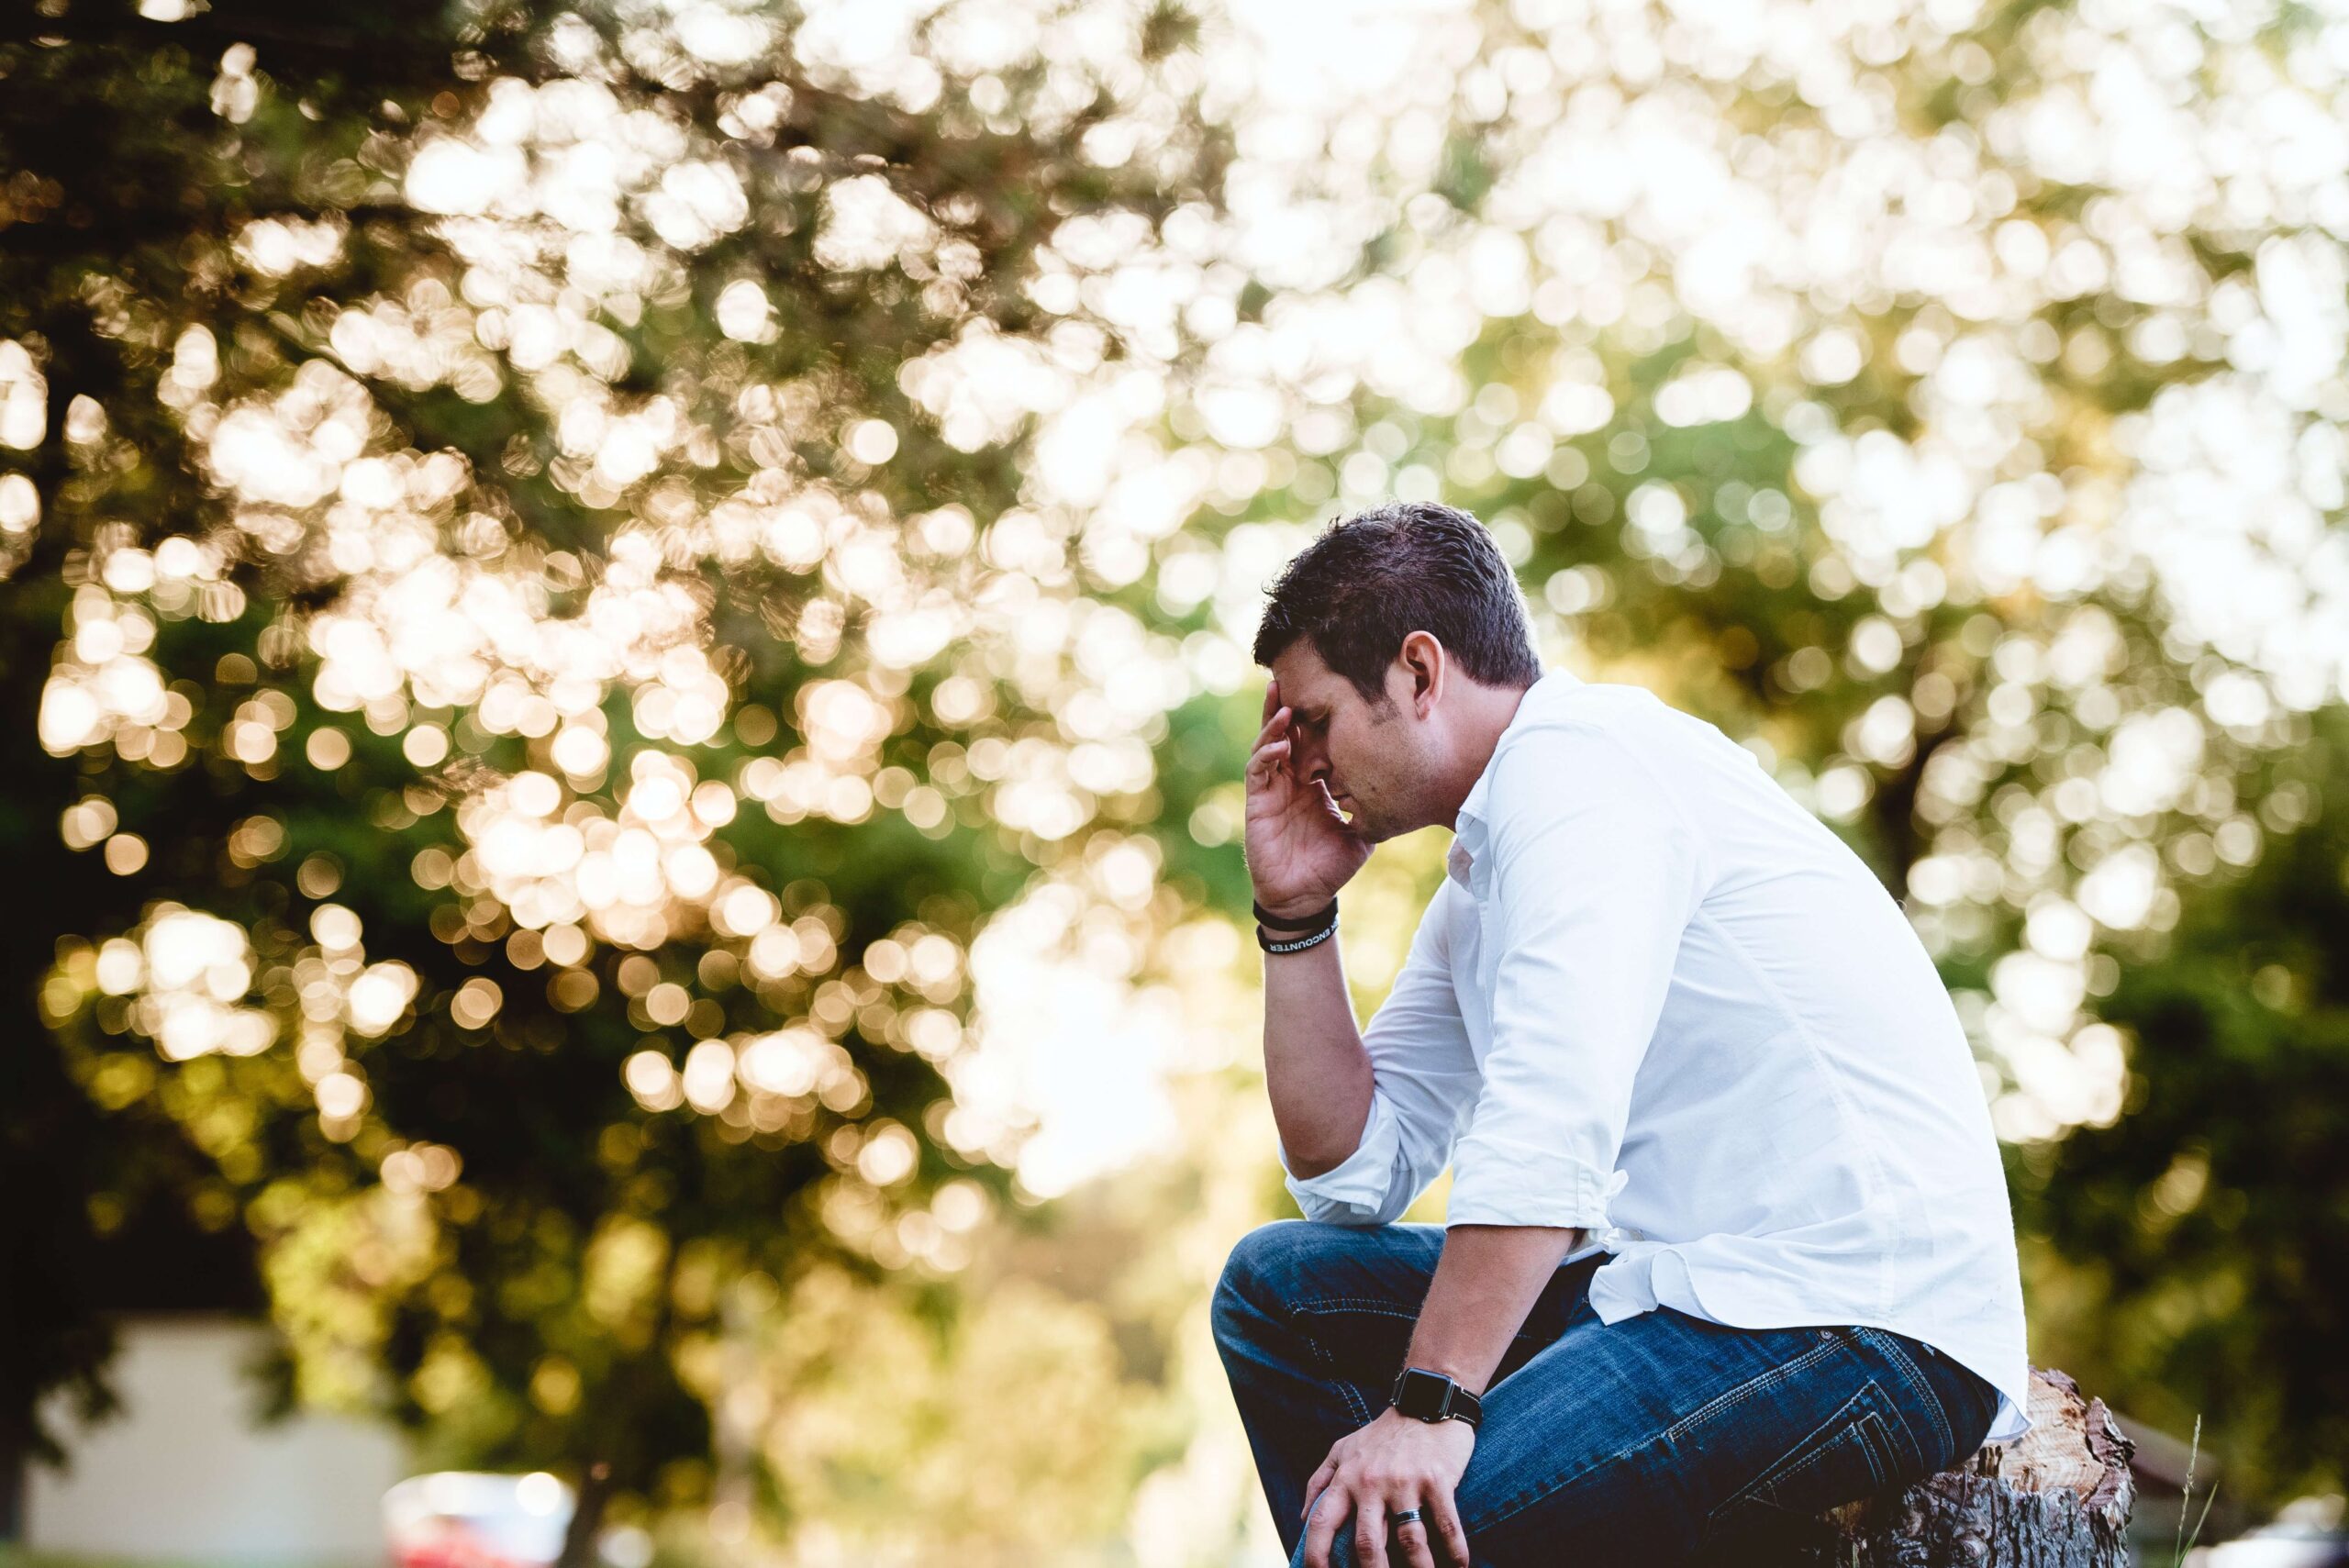 Man sitting outdoors on tree stump looking depressed with his hands on his face